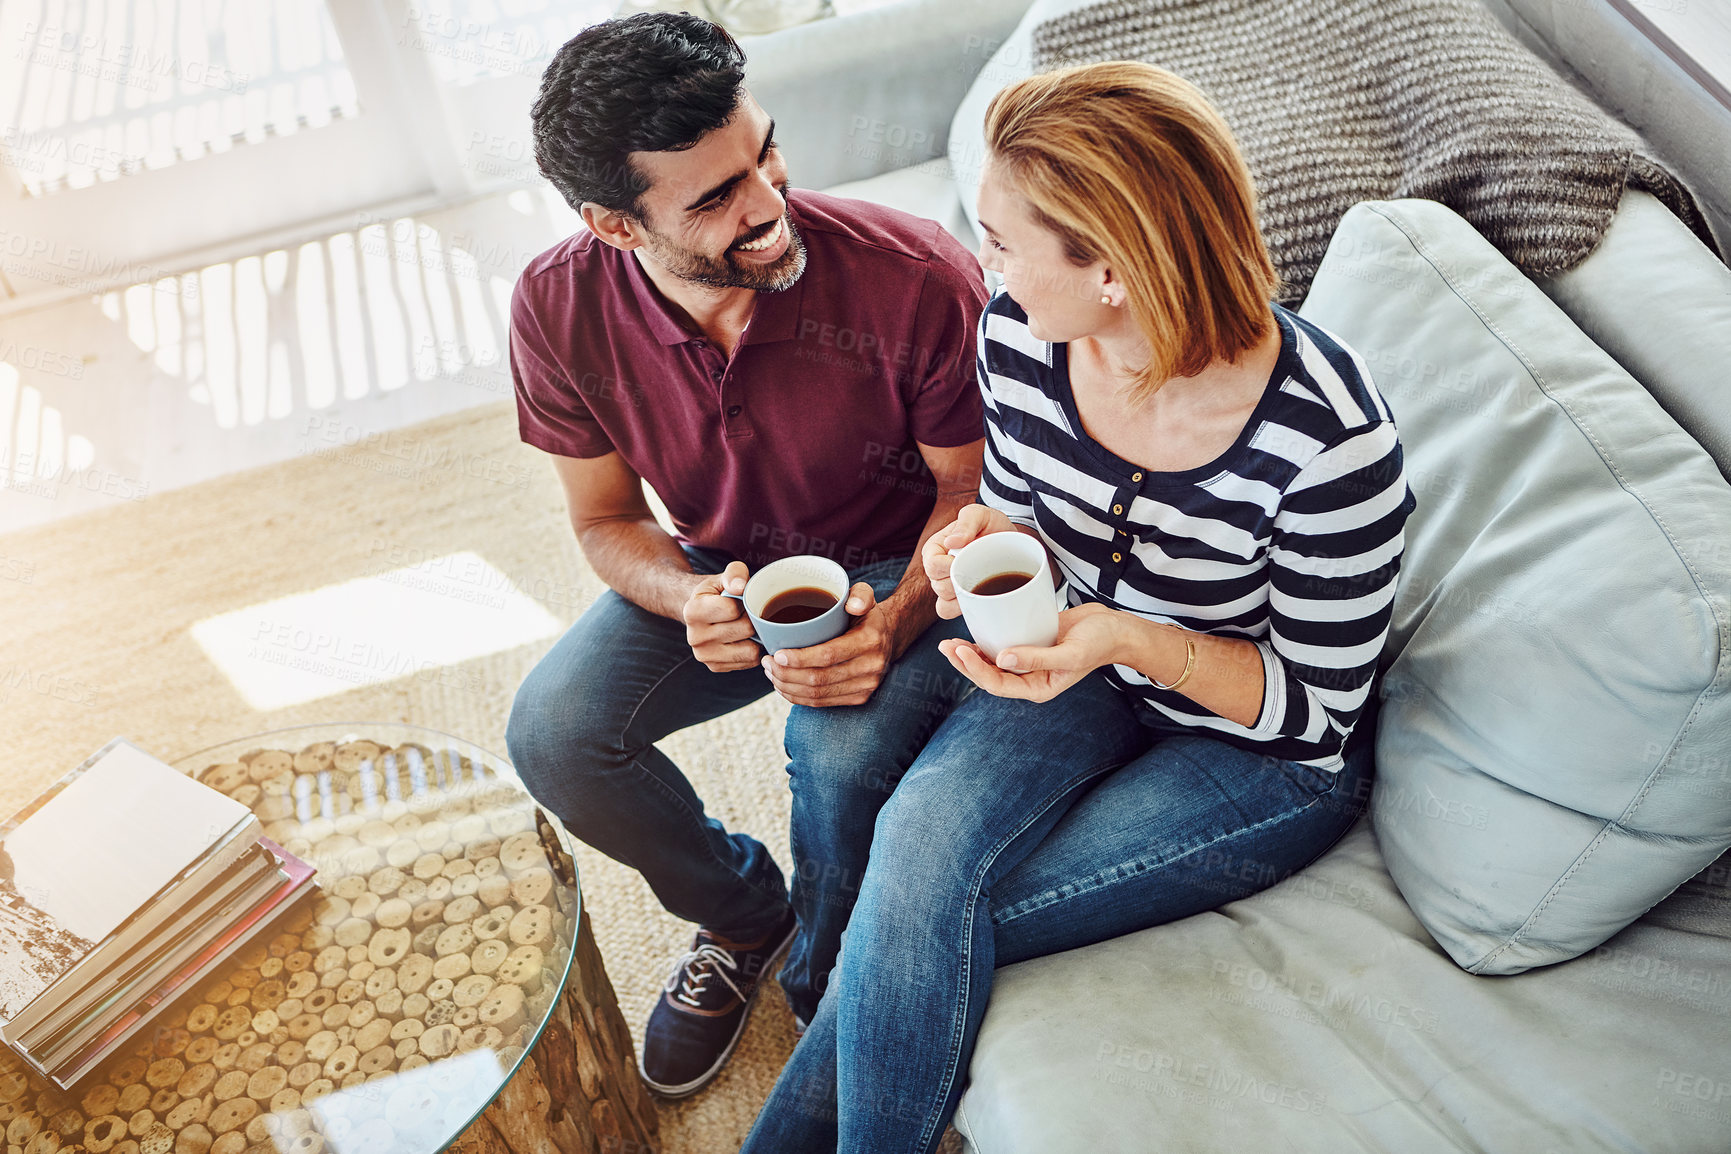 Buy stock photo High angle shot of an affectionate young couple having coffee together at home